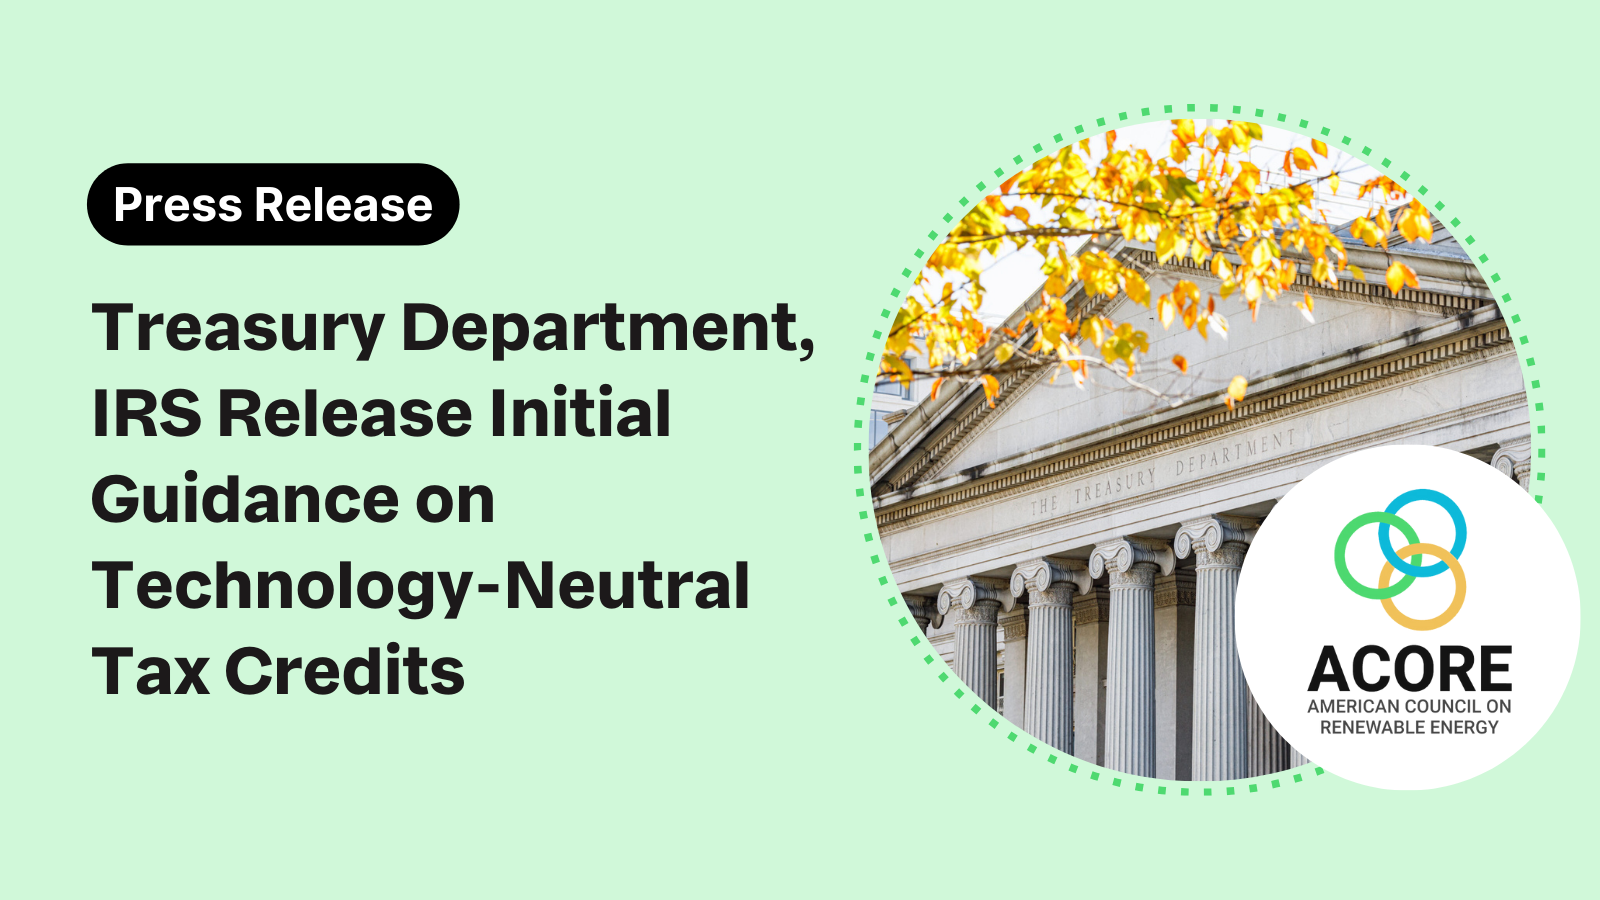 Treasury Department, IRS Release Initial Guidance on Technology-Neutral Tax Credits